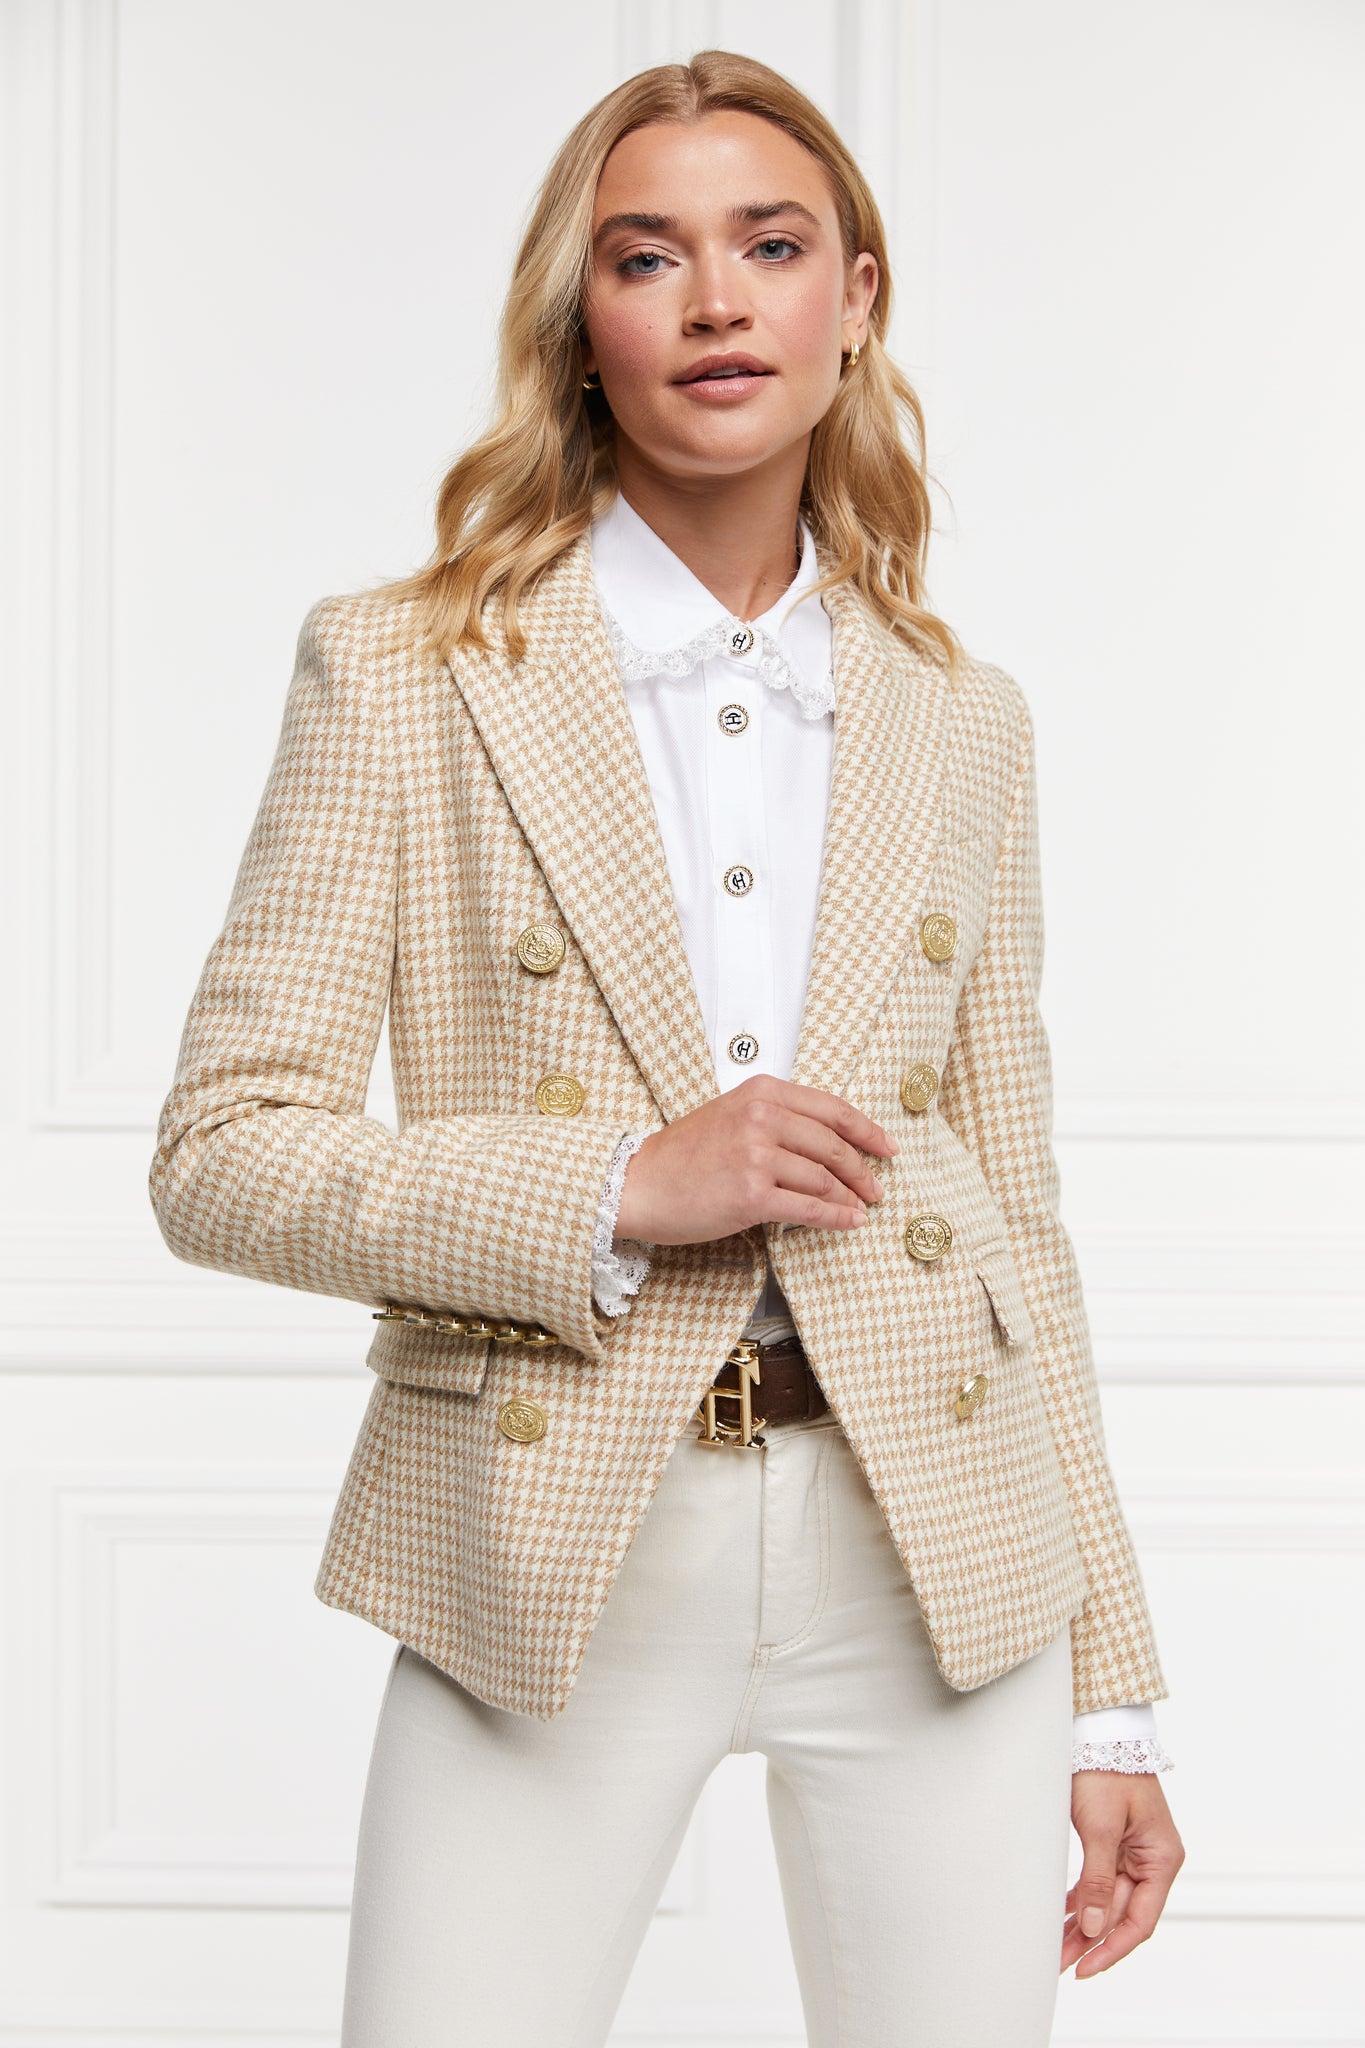 womens cream and white small scale houndstooth fitted double breasted blazer with single button fastening to the one central button for more form fitted tailored look finished with two pockets at hips and gold button details on front and cuffs